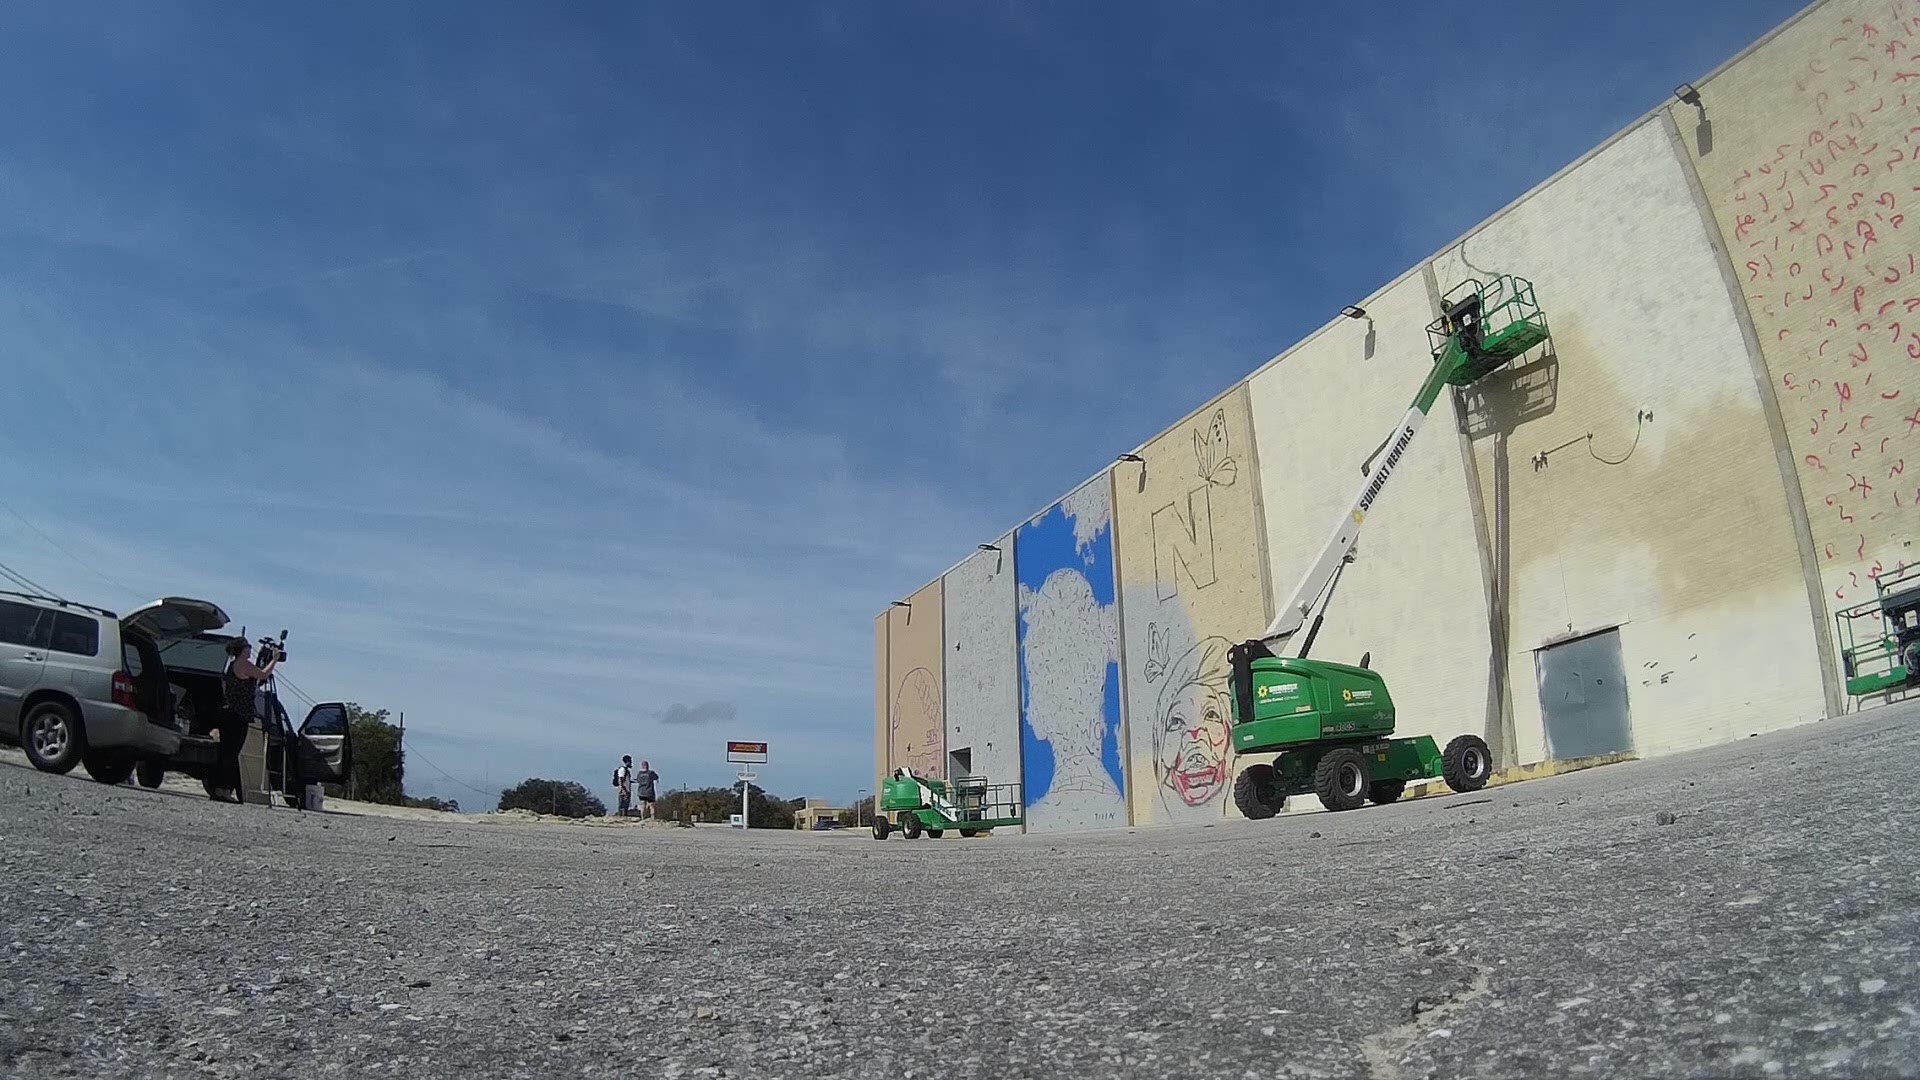 The entire mural will spell out Arlington and will be able to be seen from the Arlington Expressway.